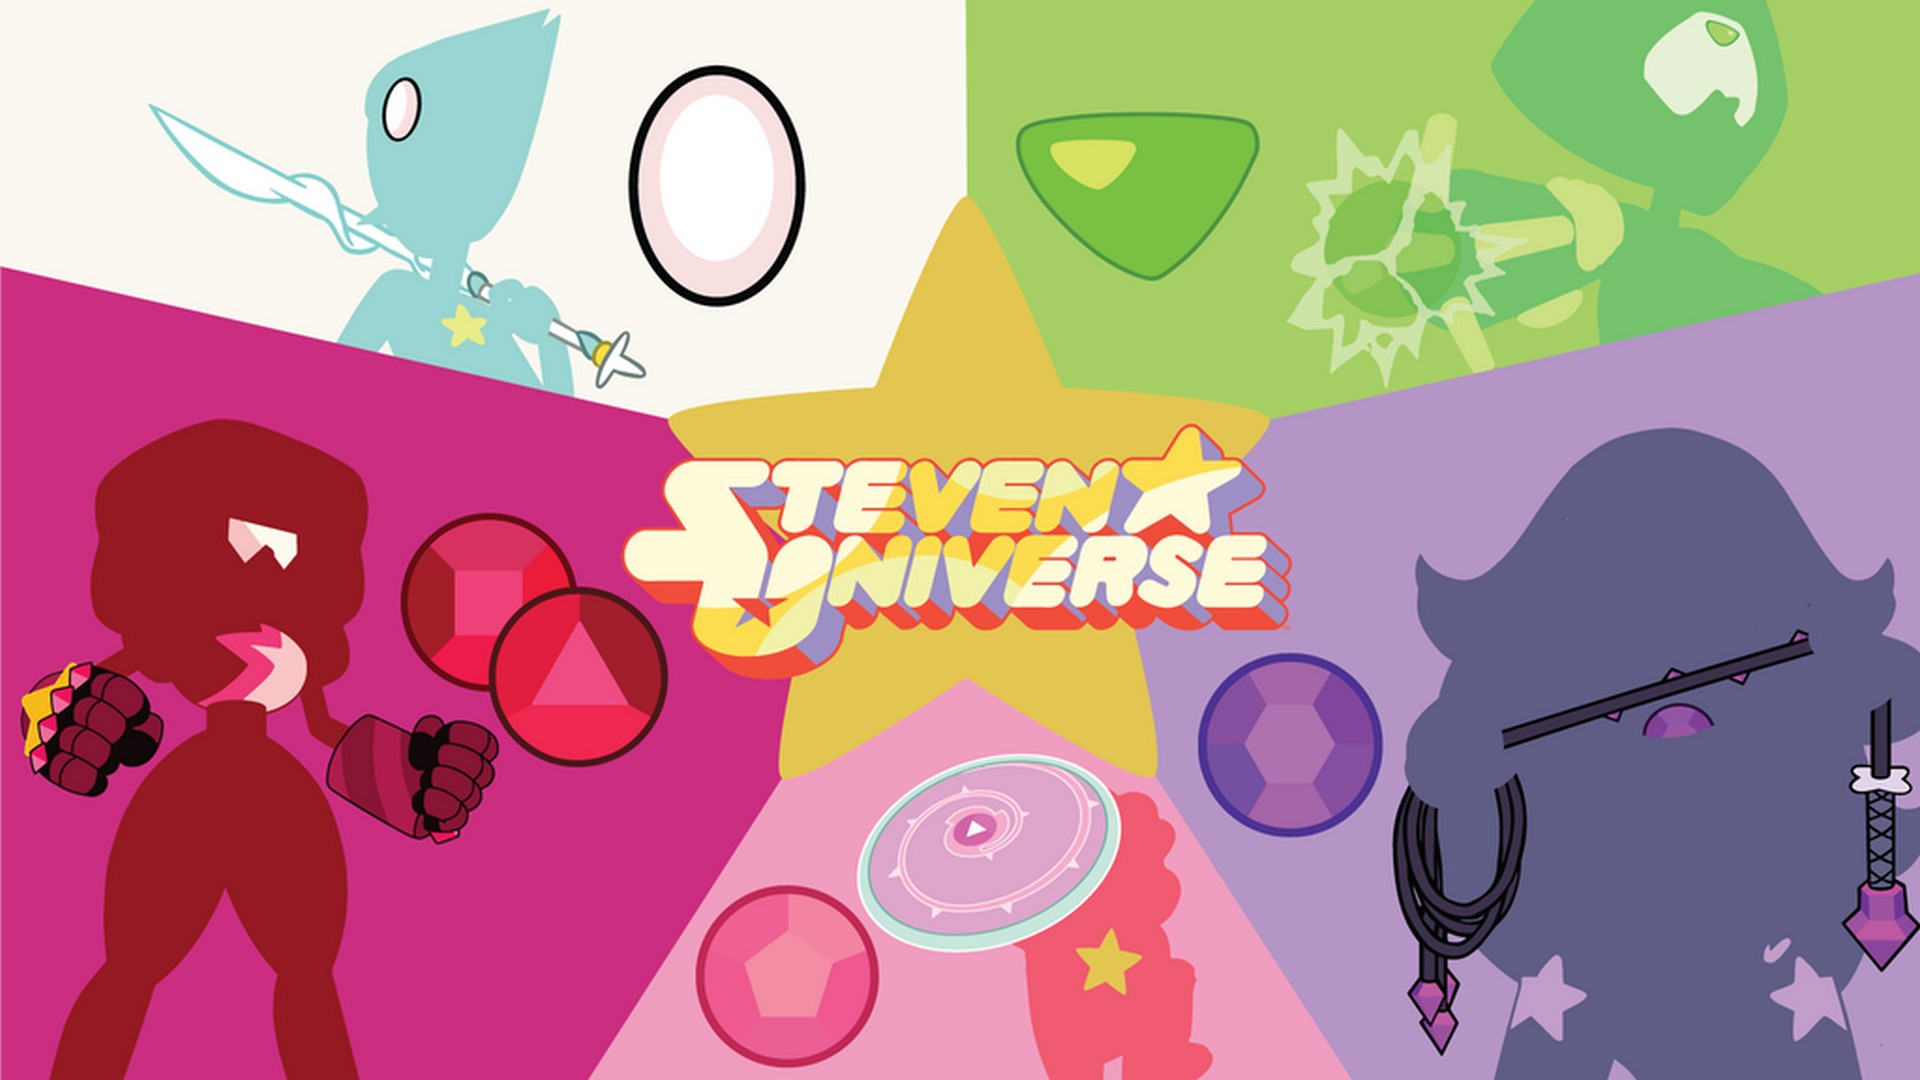 Steven Universe The Movie Wallpaper HD with high-resolution 1920x1080 pixel. You can use this wallpaper for your Desktop Computer Backgrounds, Mac Wallpapers, Android Lock screen or iPhone Screensavers and another smartphone device